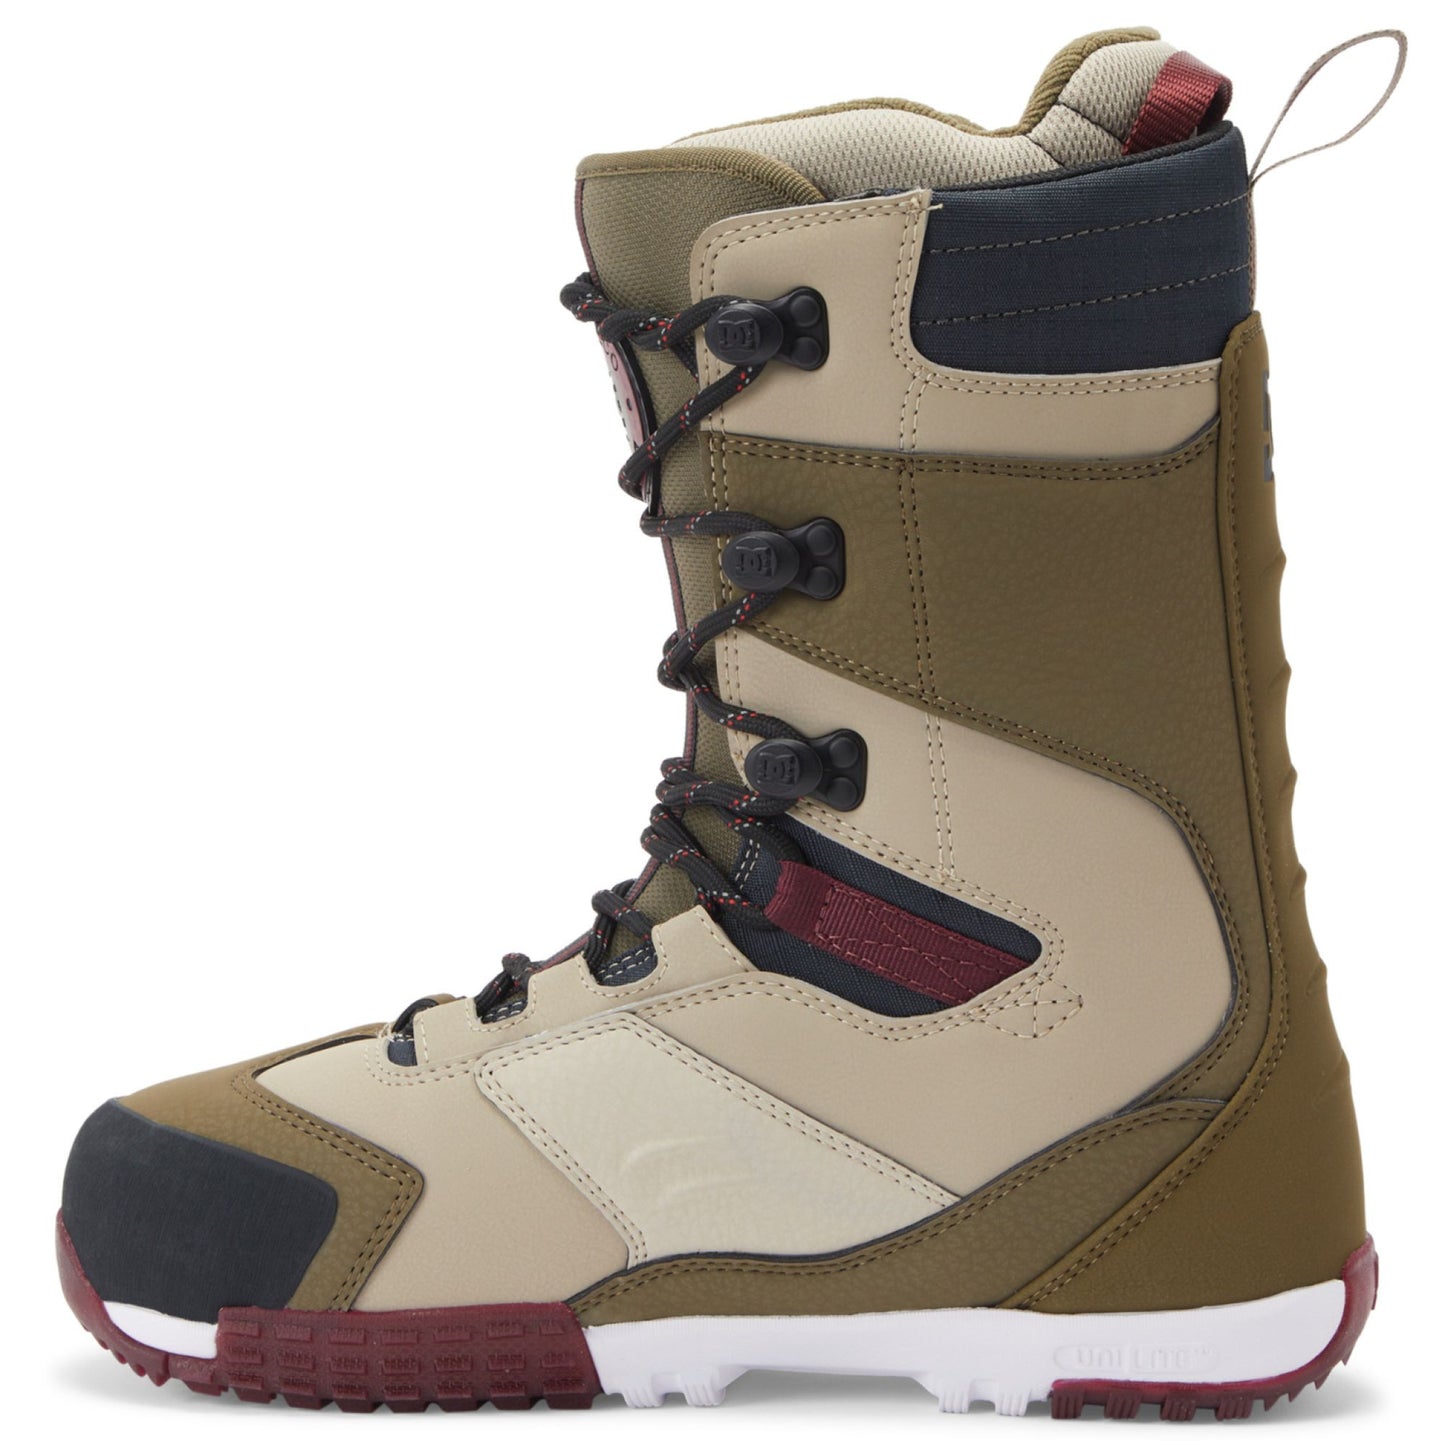 DC Premier Hybrid Snowboard Boots Olive Military Snowboard Boots